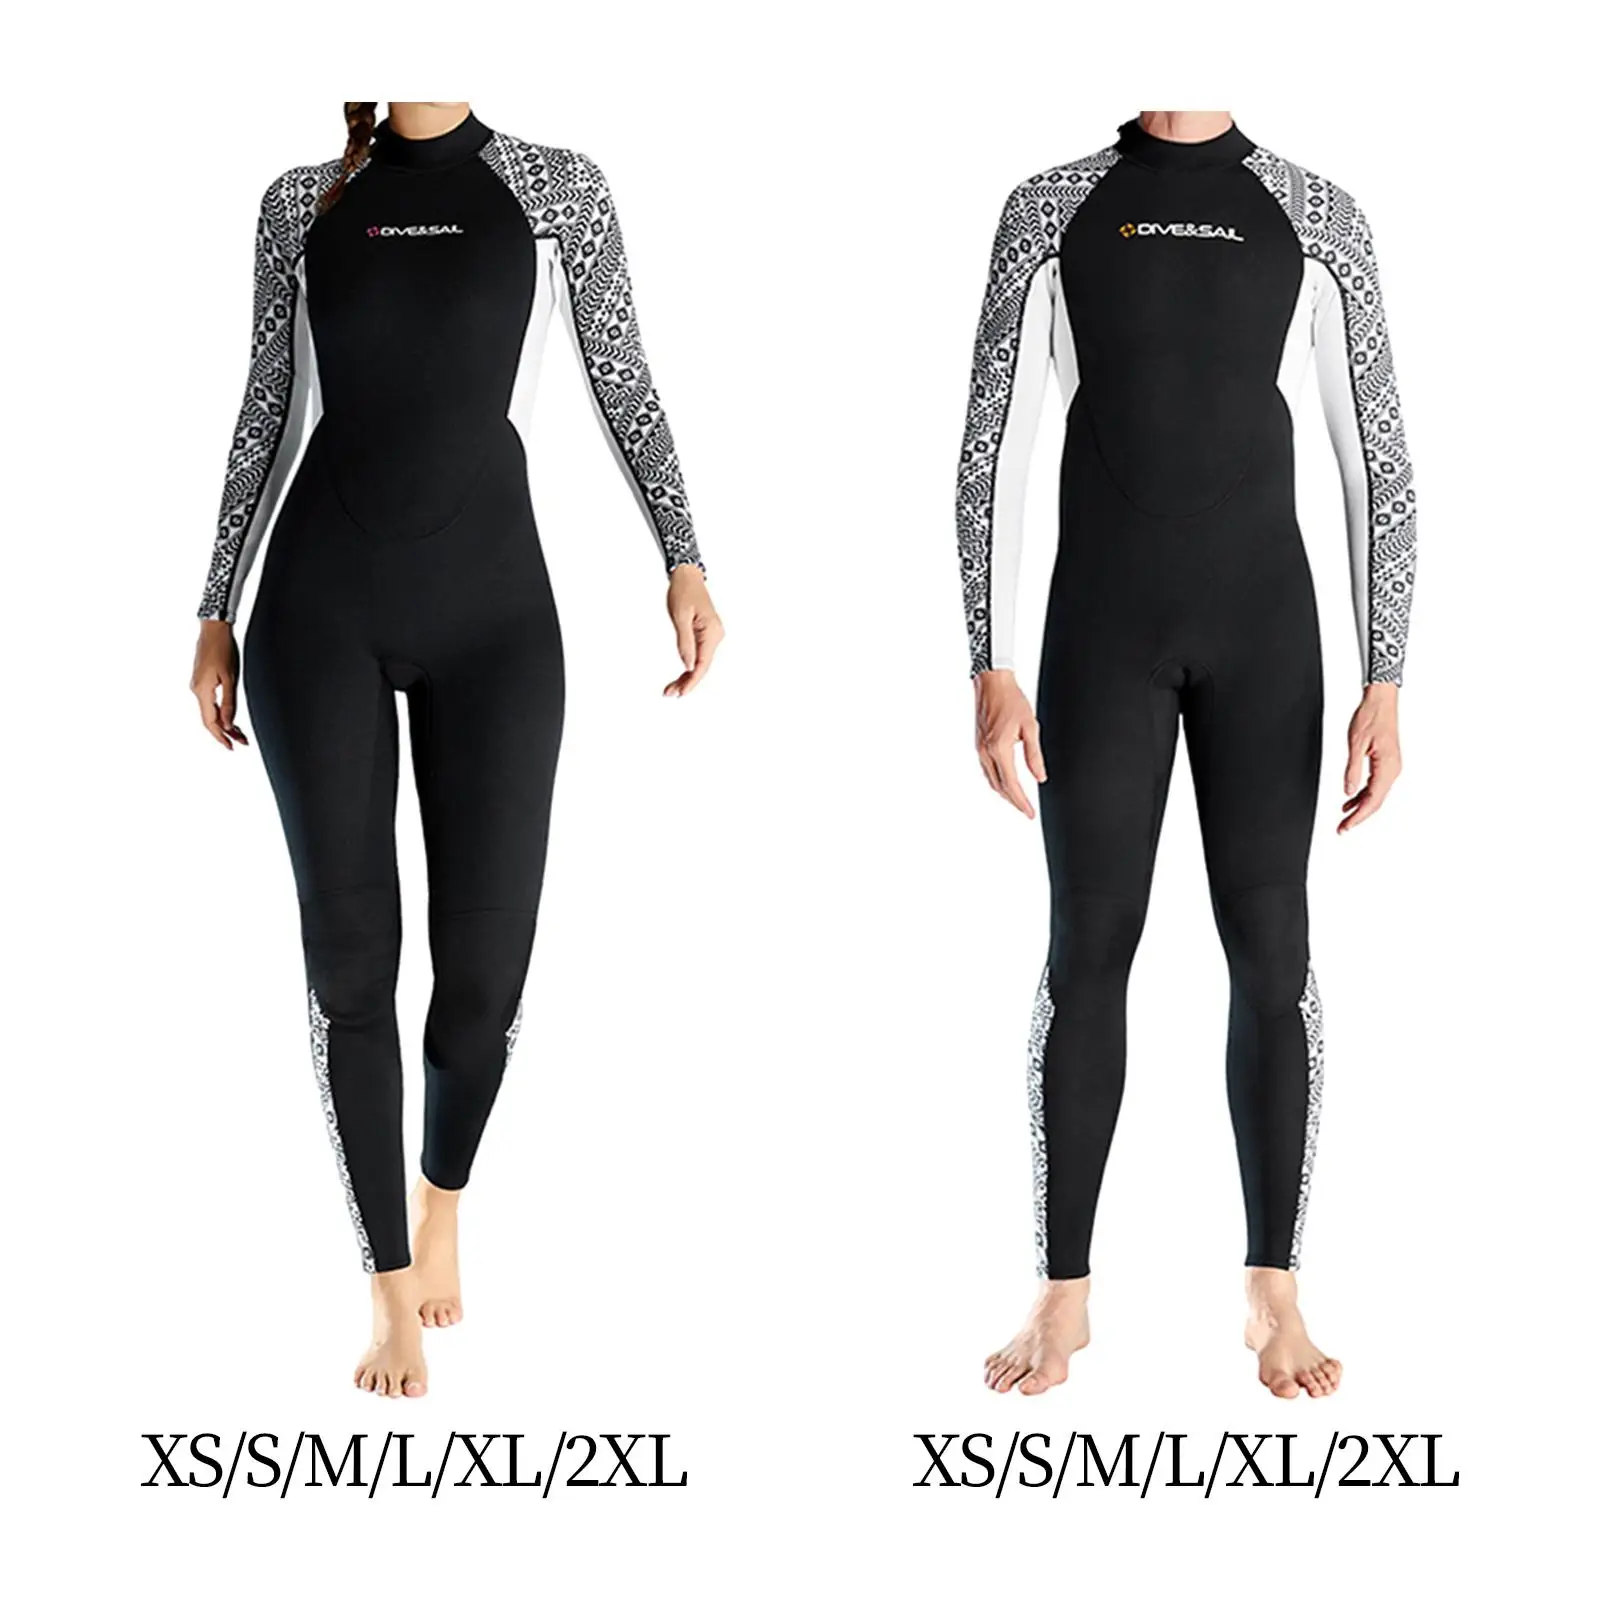 

Wetsuit for Adult 3mm Neoprene Long Sleeve Coldproof Surfing Suit for Kayaking Winter Swimming Scuba Snorkeling Boating Canoeing